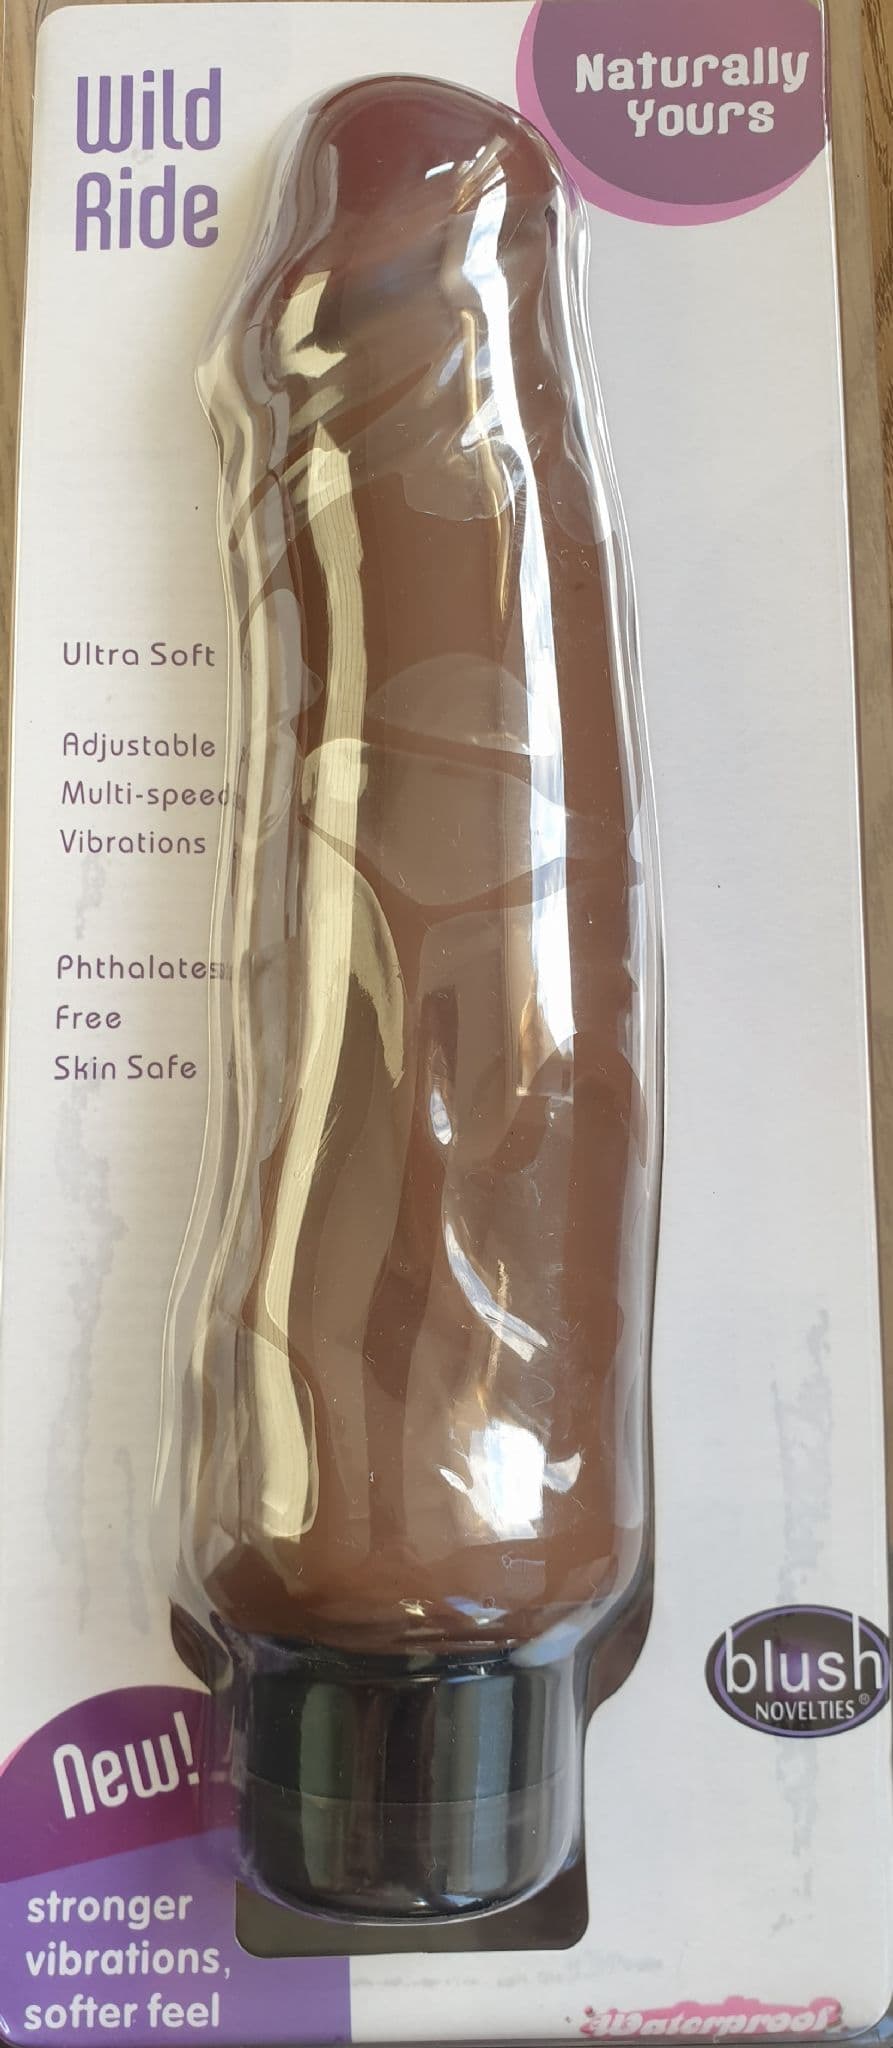 Realistic, 9-inch dildo finished with powerful vibrations